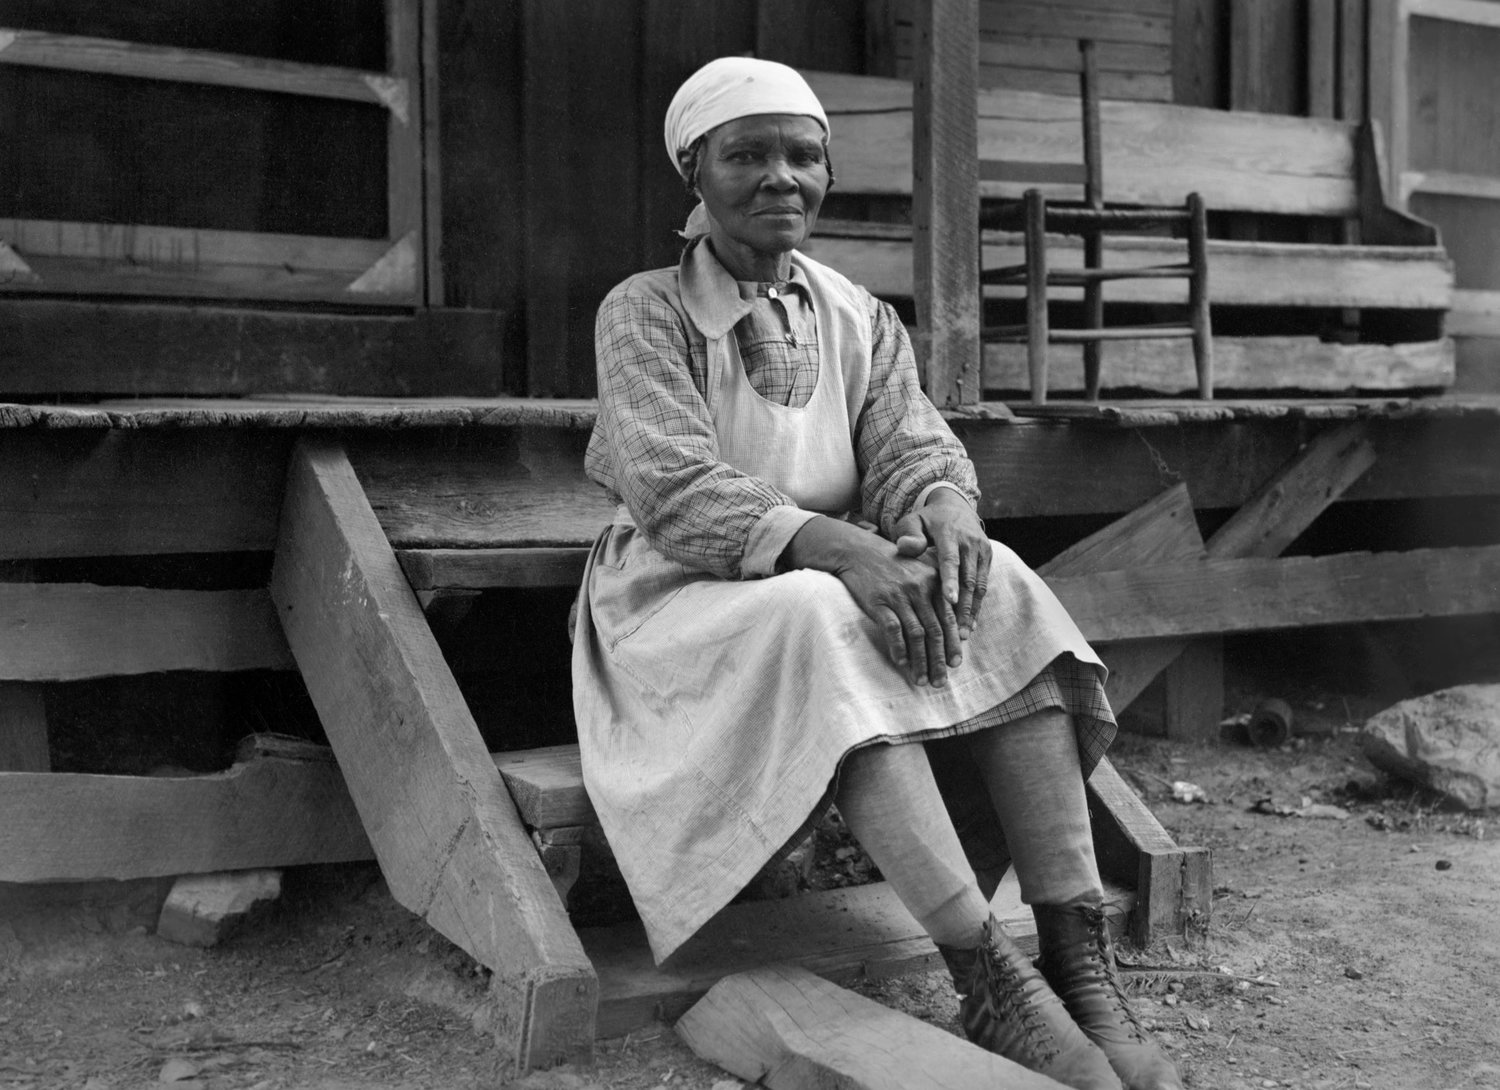 This photo of a woman sitting on porch steps is part of an exhibit at the Center for Missouri Studies in Columbia. Photograph by O.N. Pruitt.